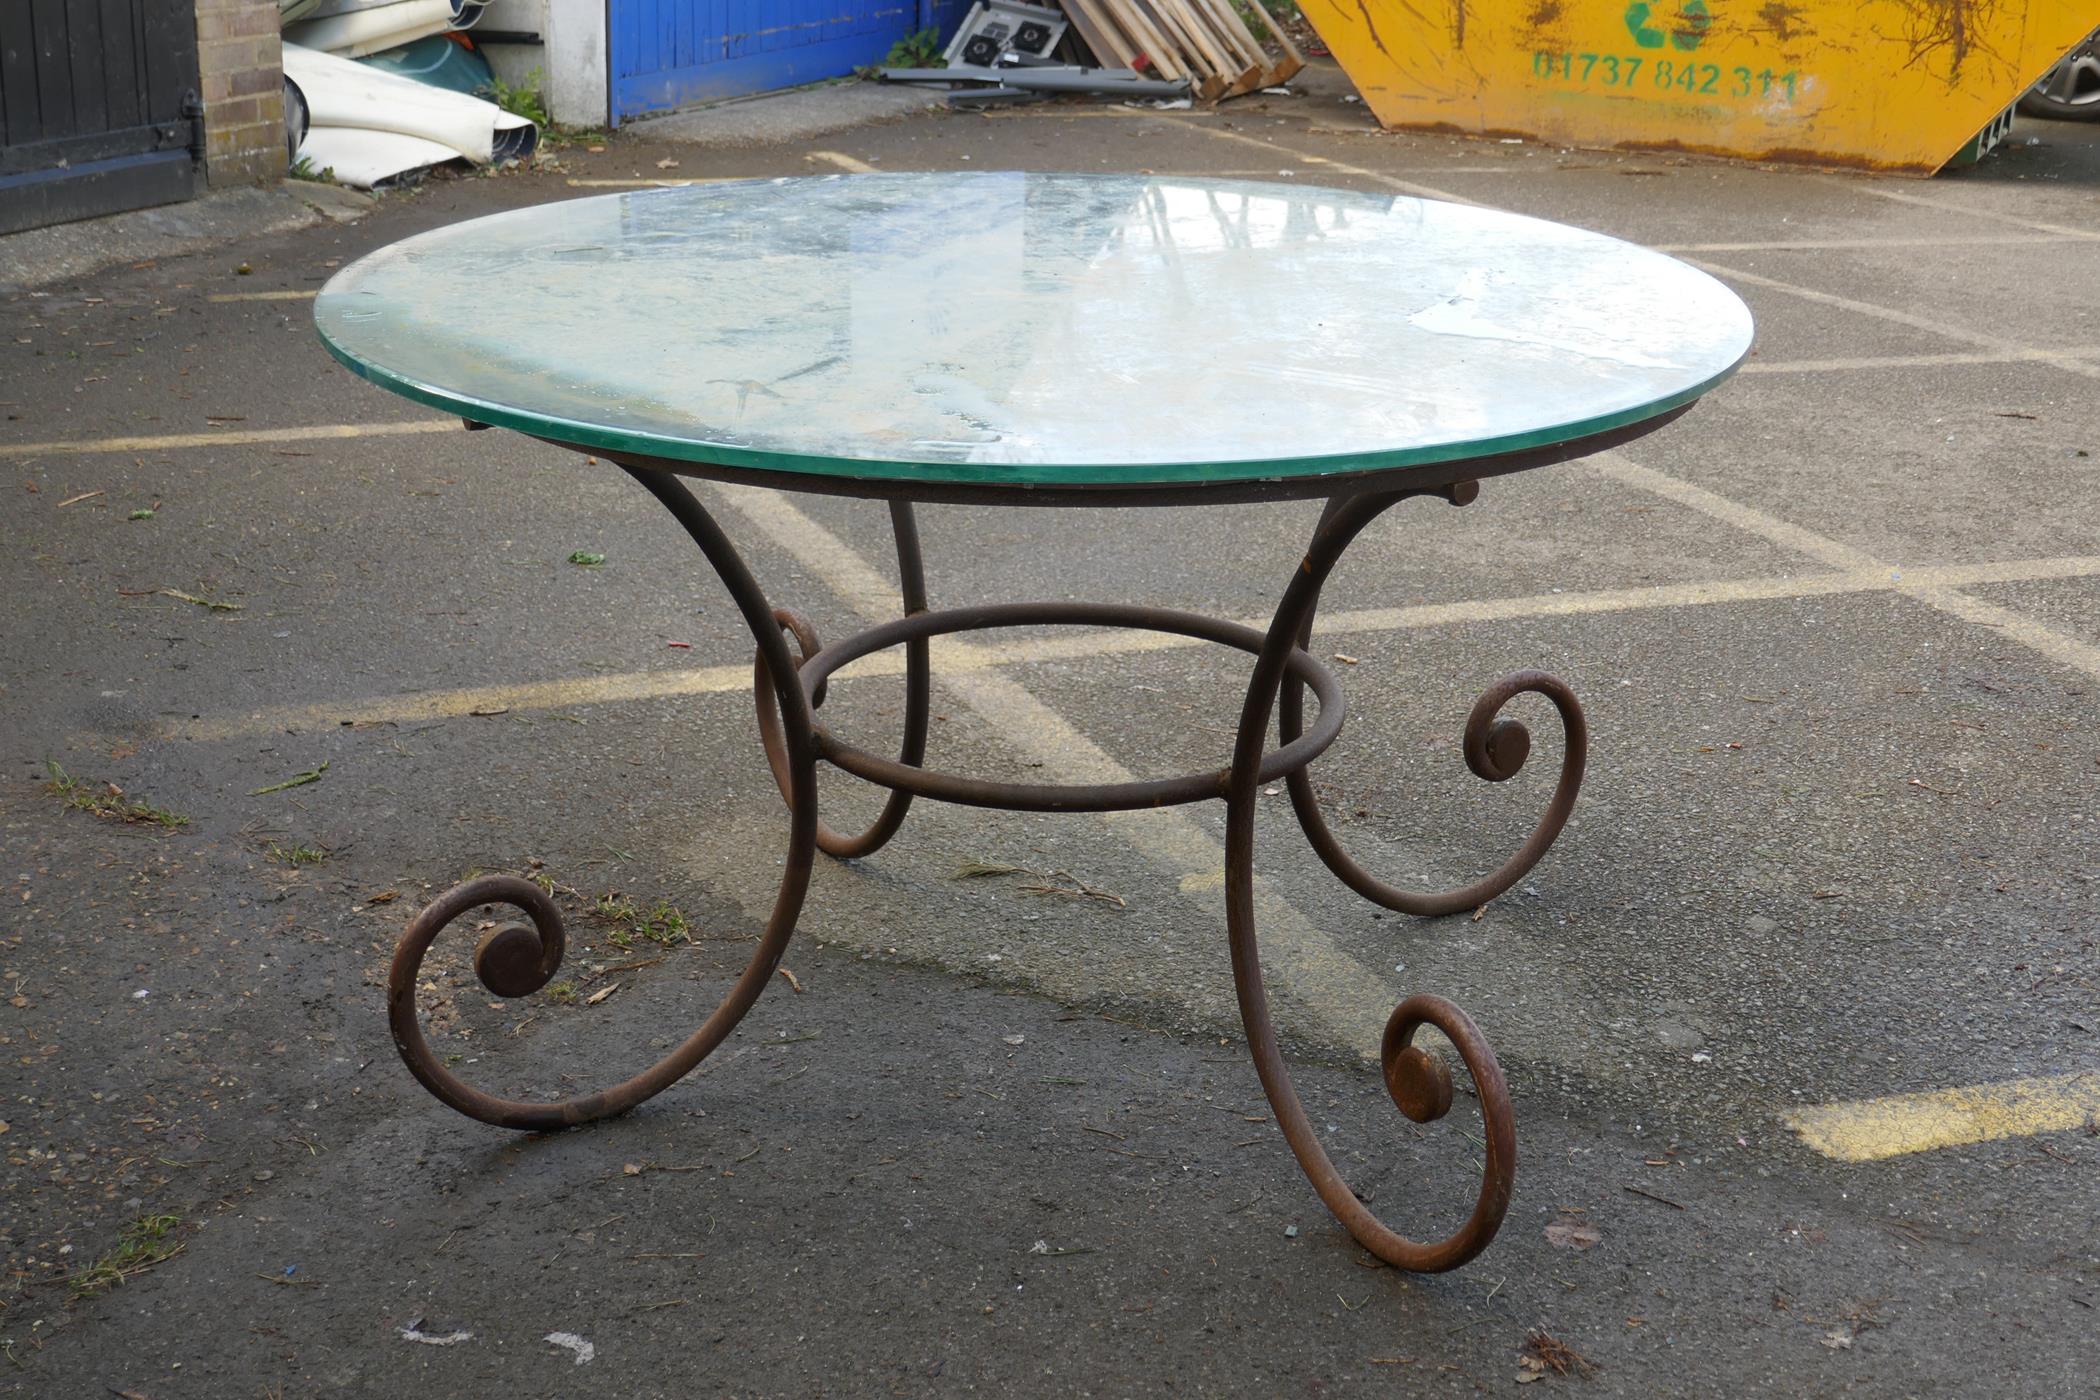 A wrought iron garden / conservatory table with plate glass top, 53" diameter, 30" high